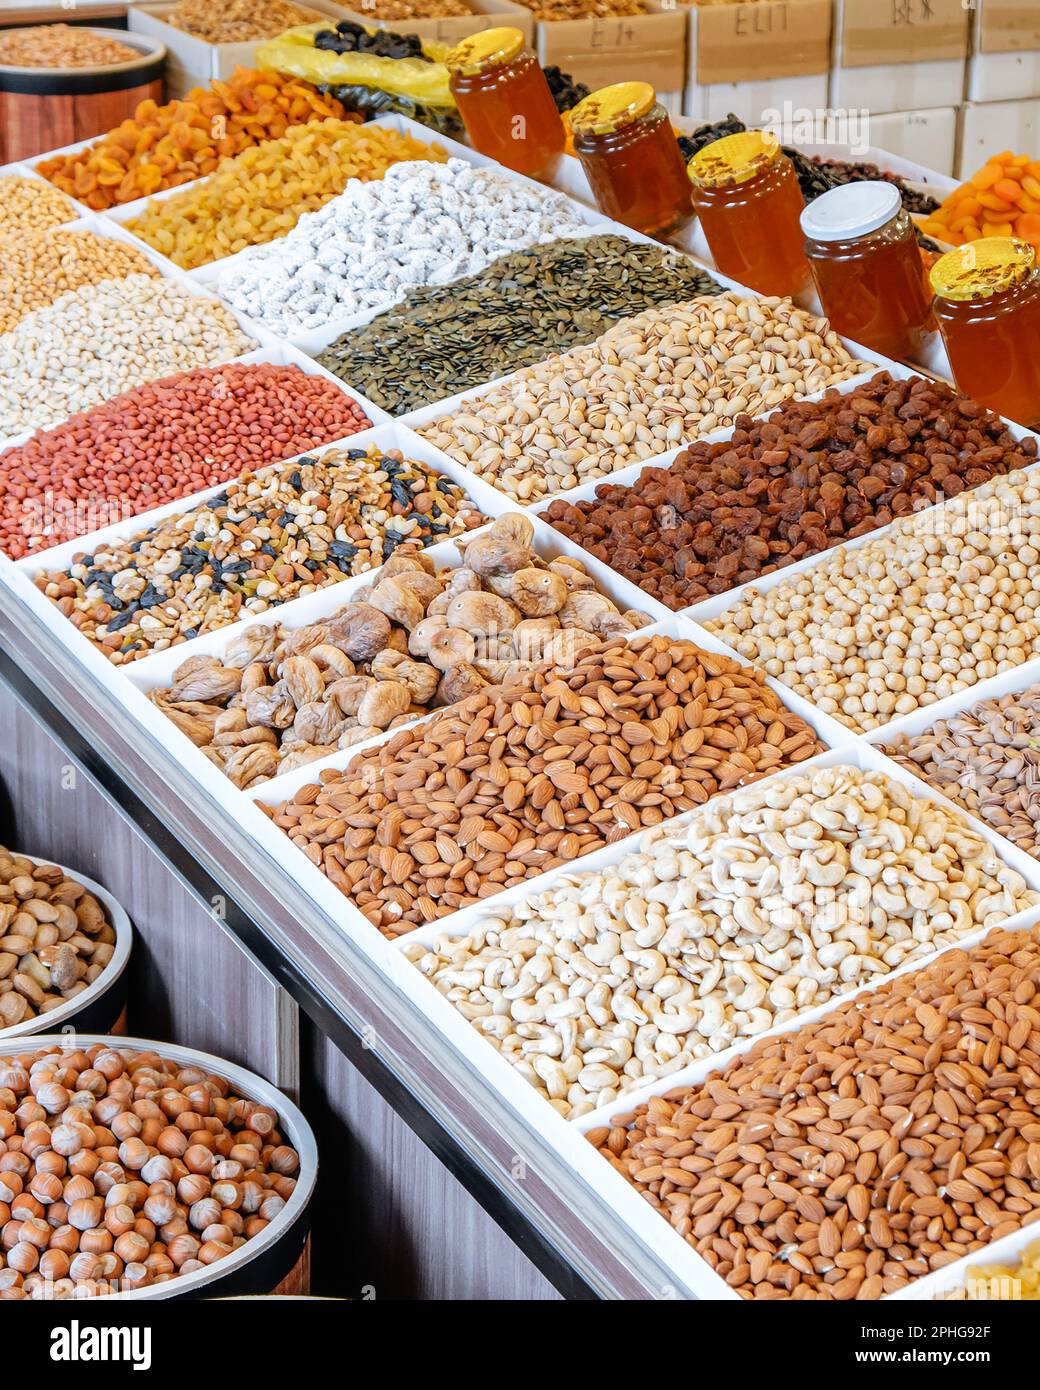 A vertical shot of a marketplace with piles of nuts and dried fruits Stock Photo